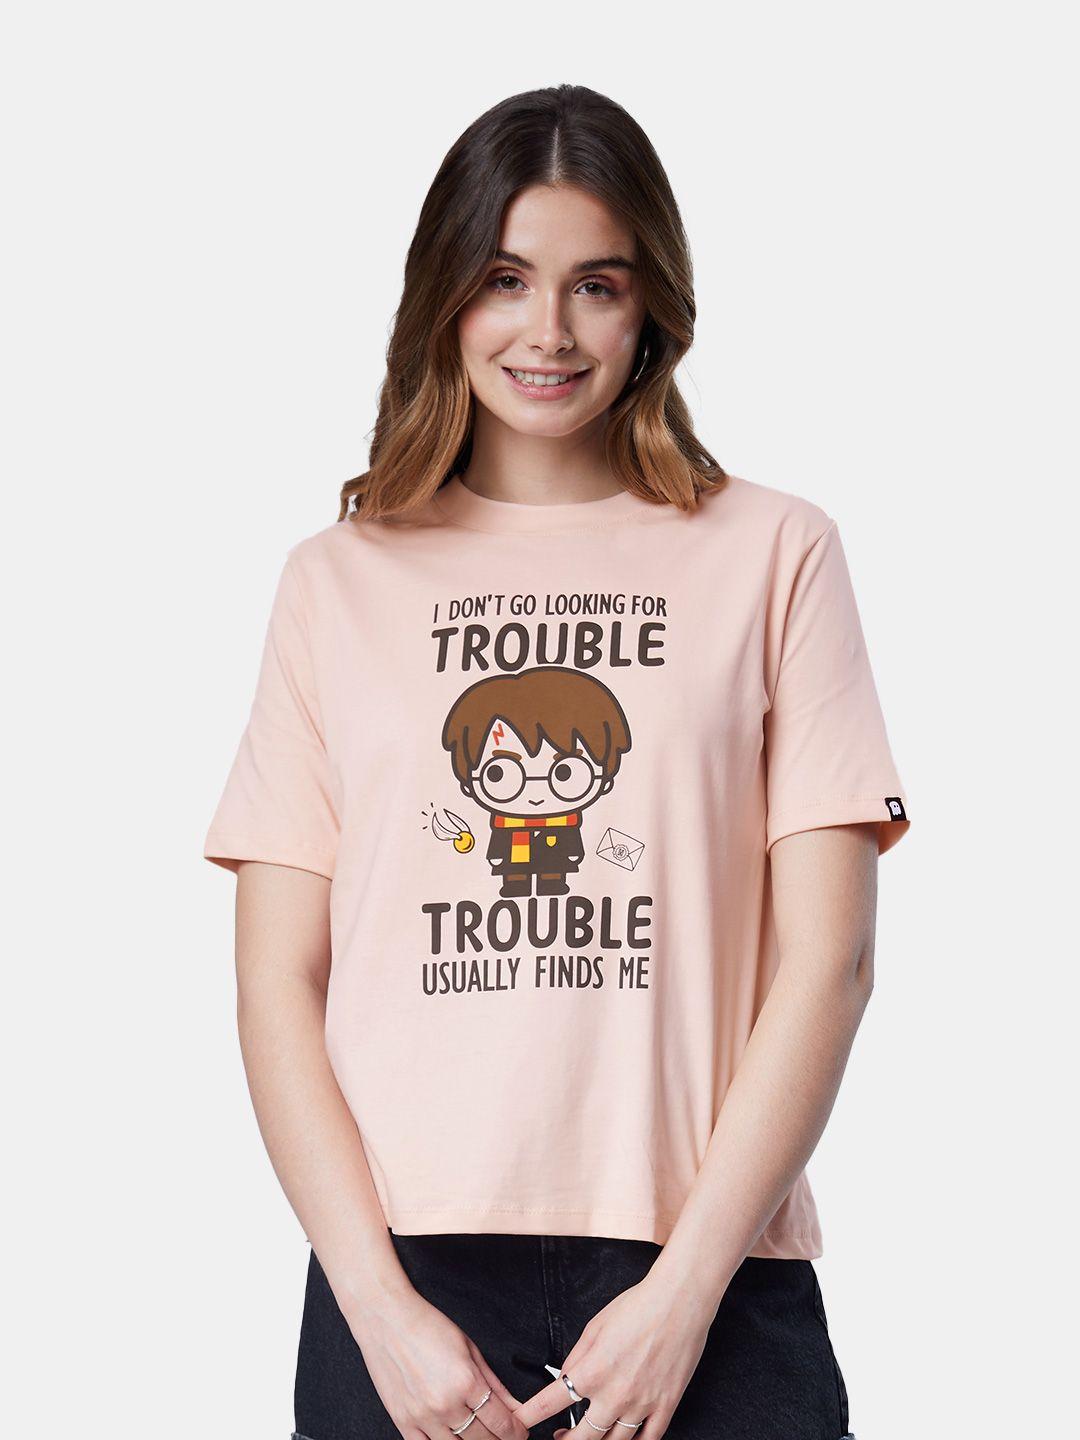 the-souled-store-women-printed-round-neck-cotton-t-shirt